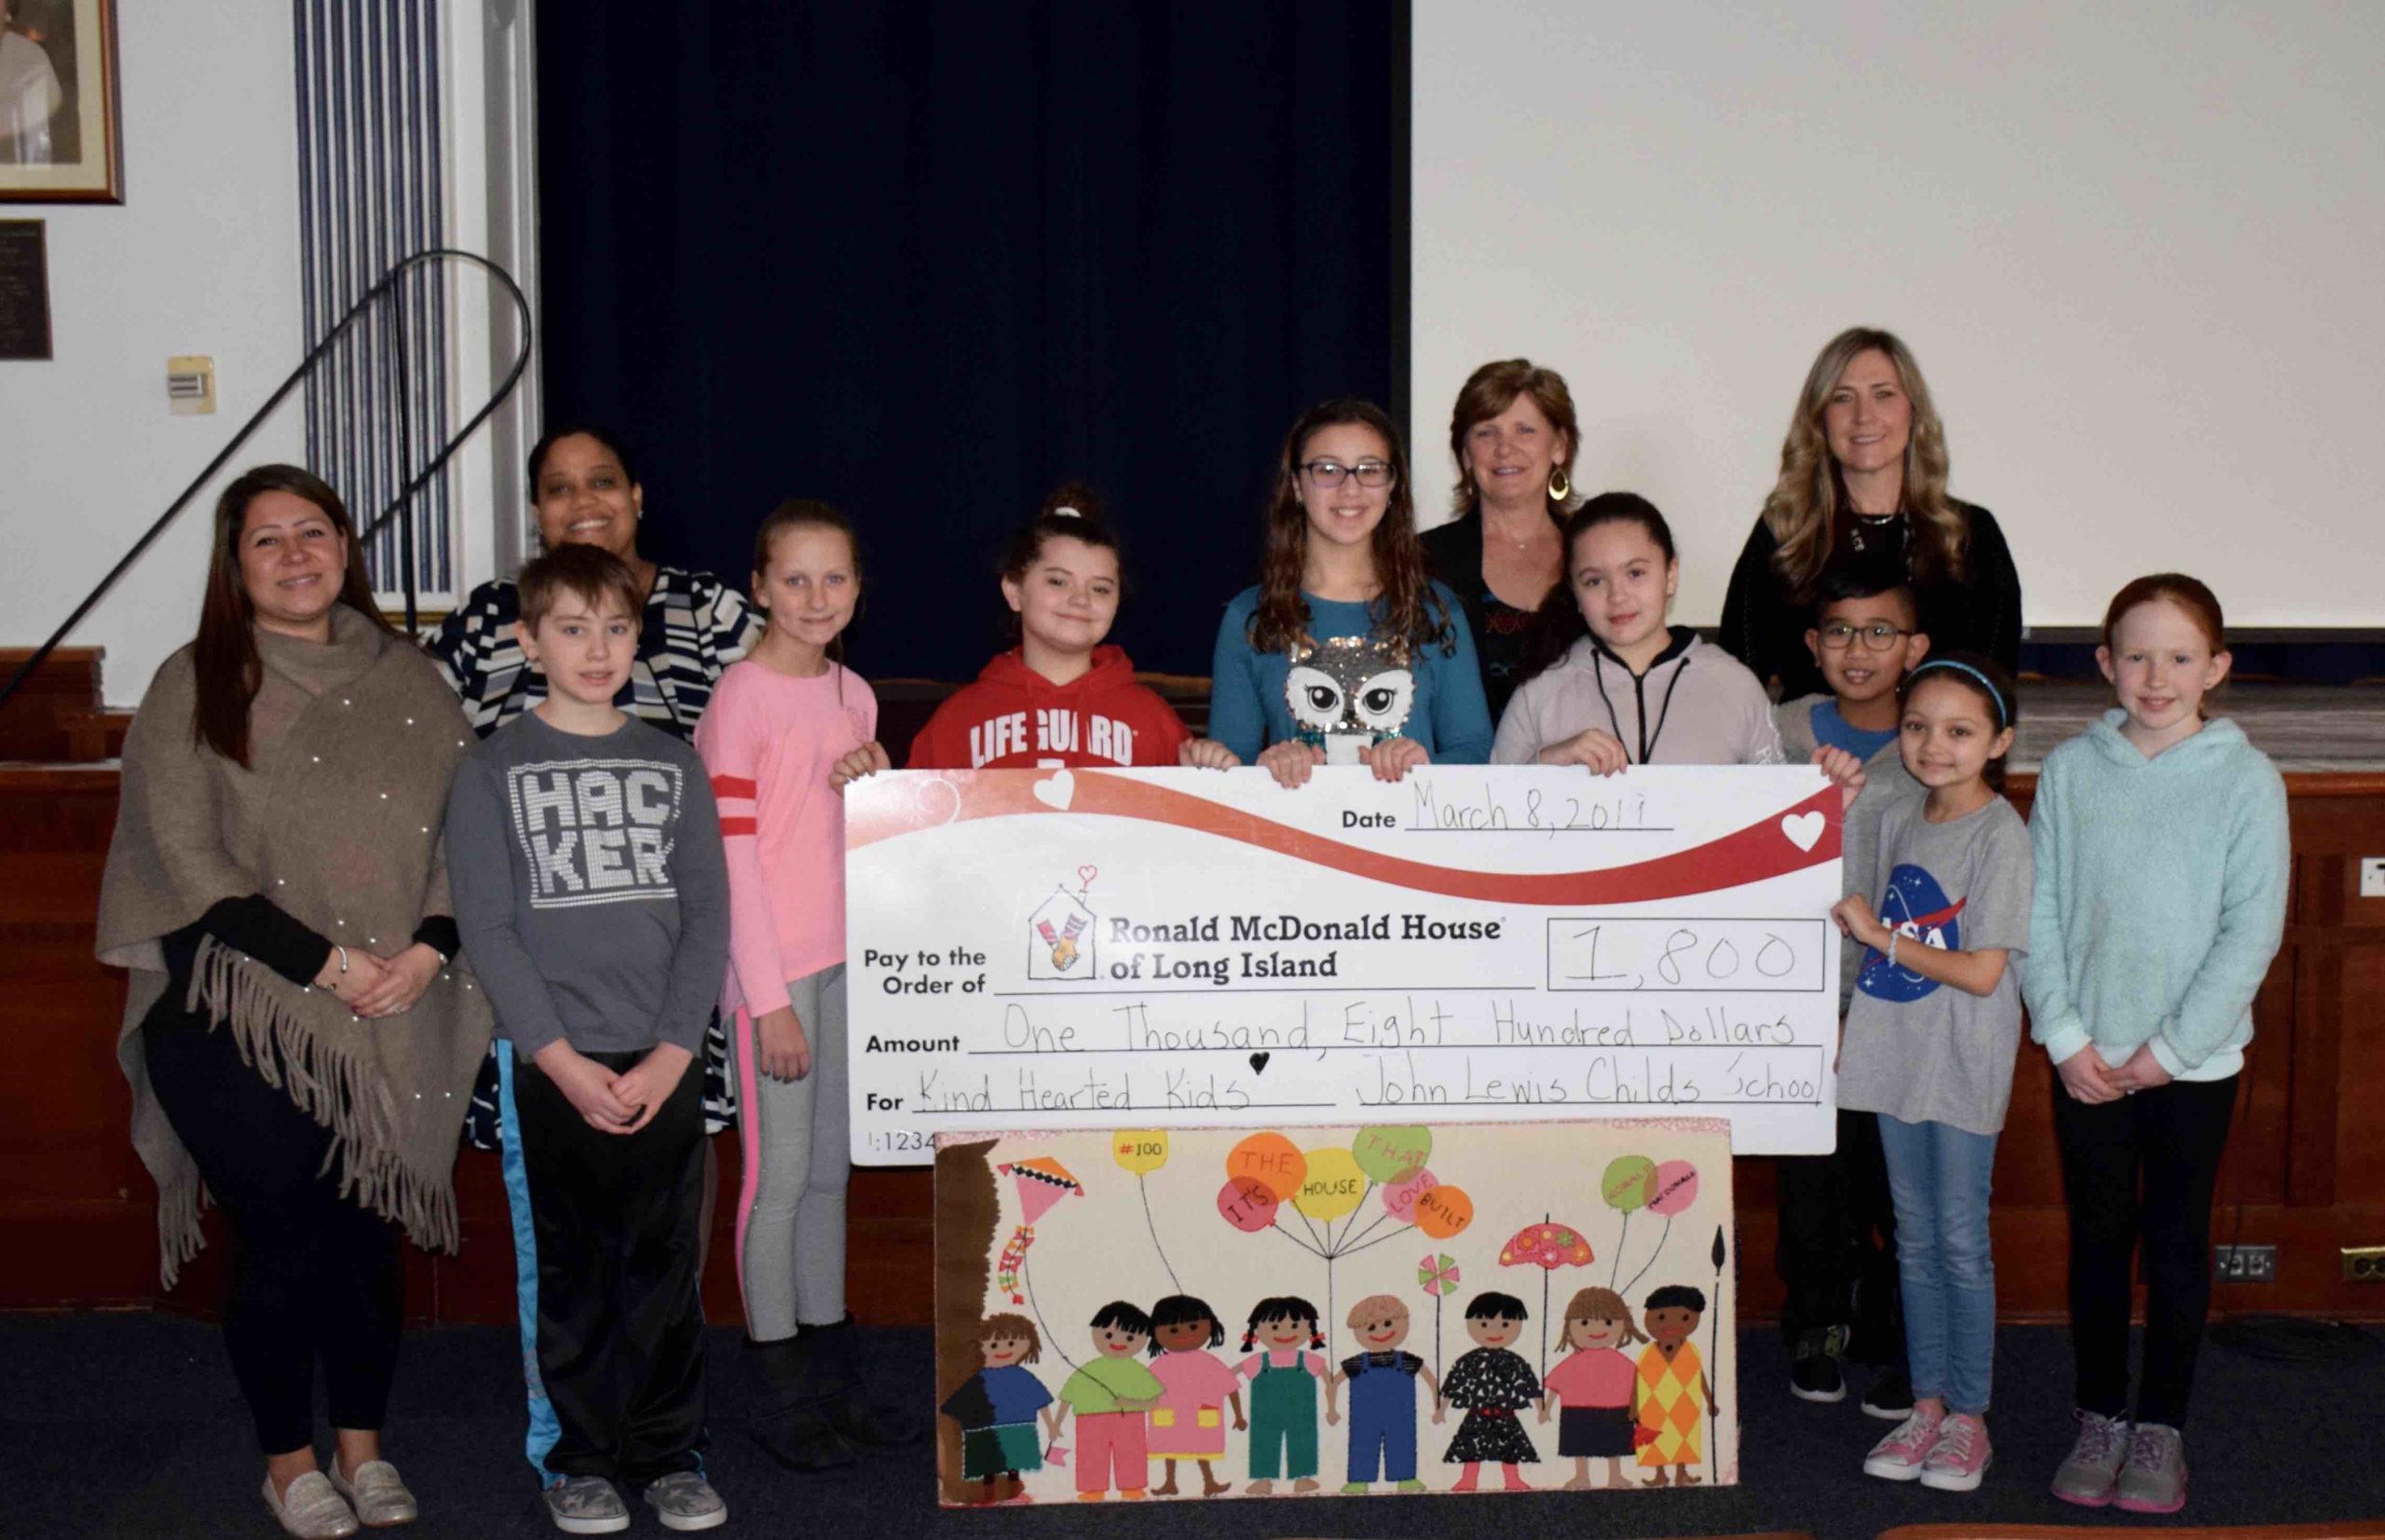 John Lewis Childs School Student Council members are pictured with adviser Kelly Zullo, Principal Susan Fazio and Ronald McDonald House of Long Island Development Manager Jovann Dixon and Hospitality and Event volunteer Joanne Wolfring. (Photo courtesy of the Floral Park-Bellerose School District)